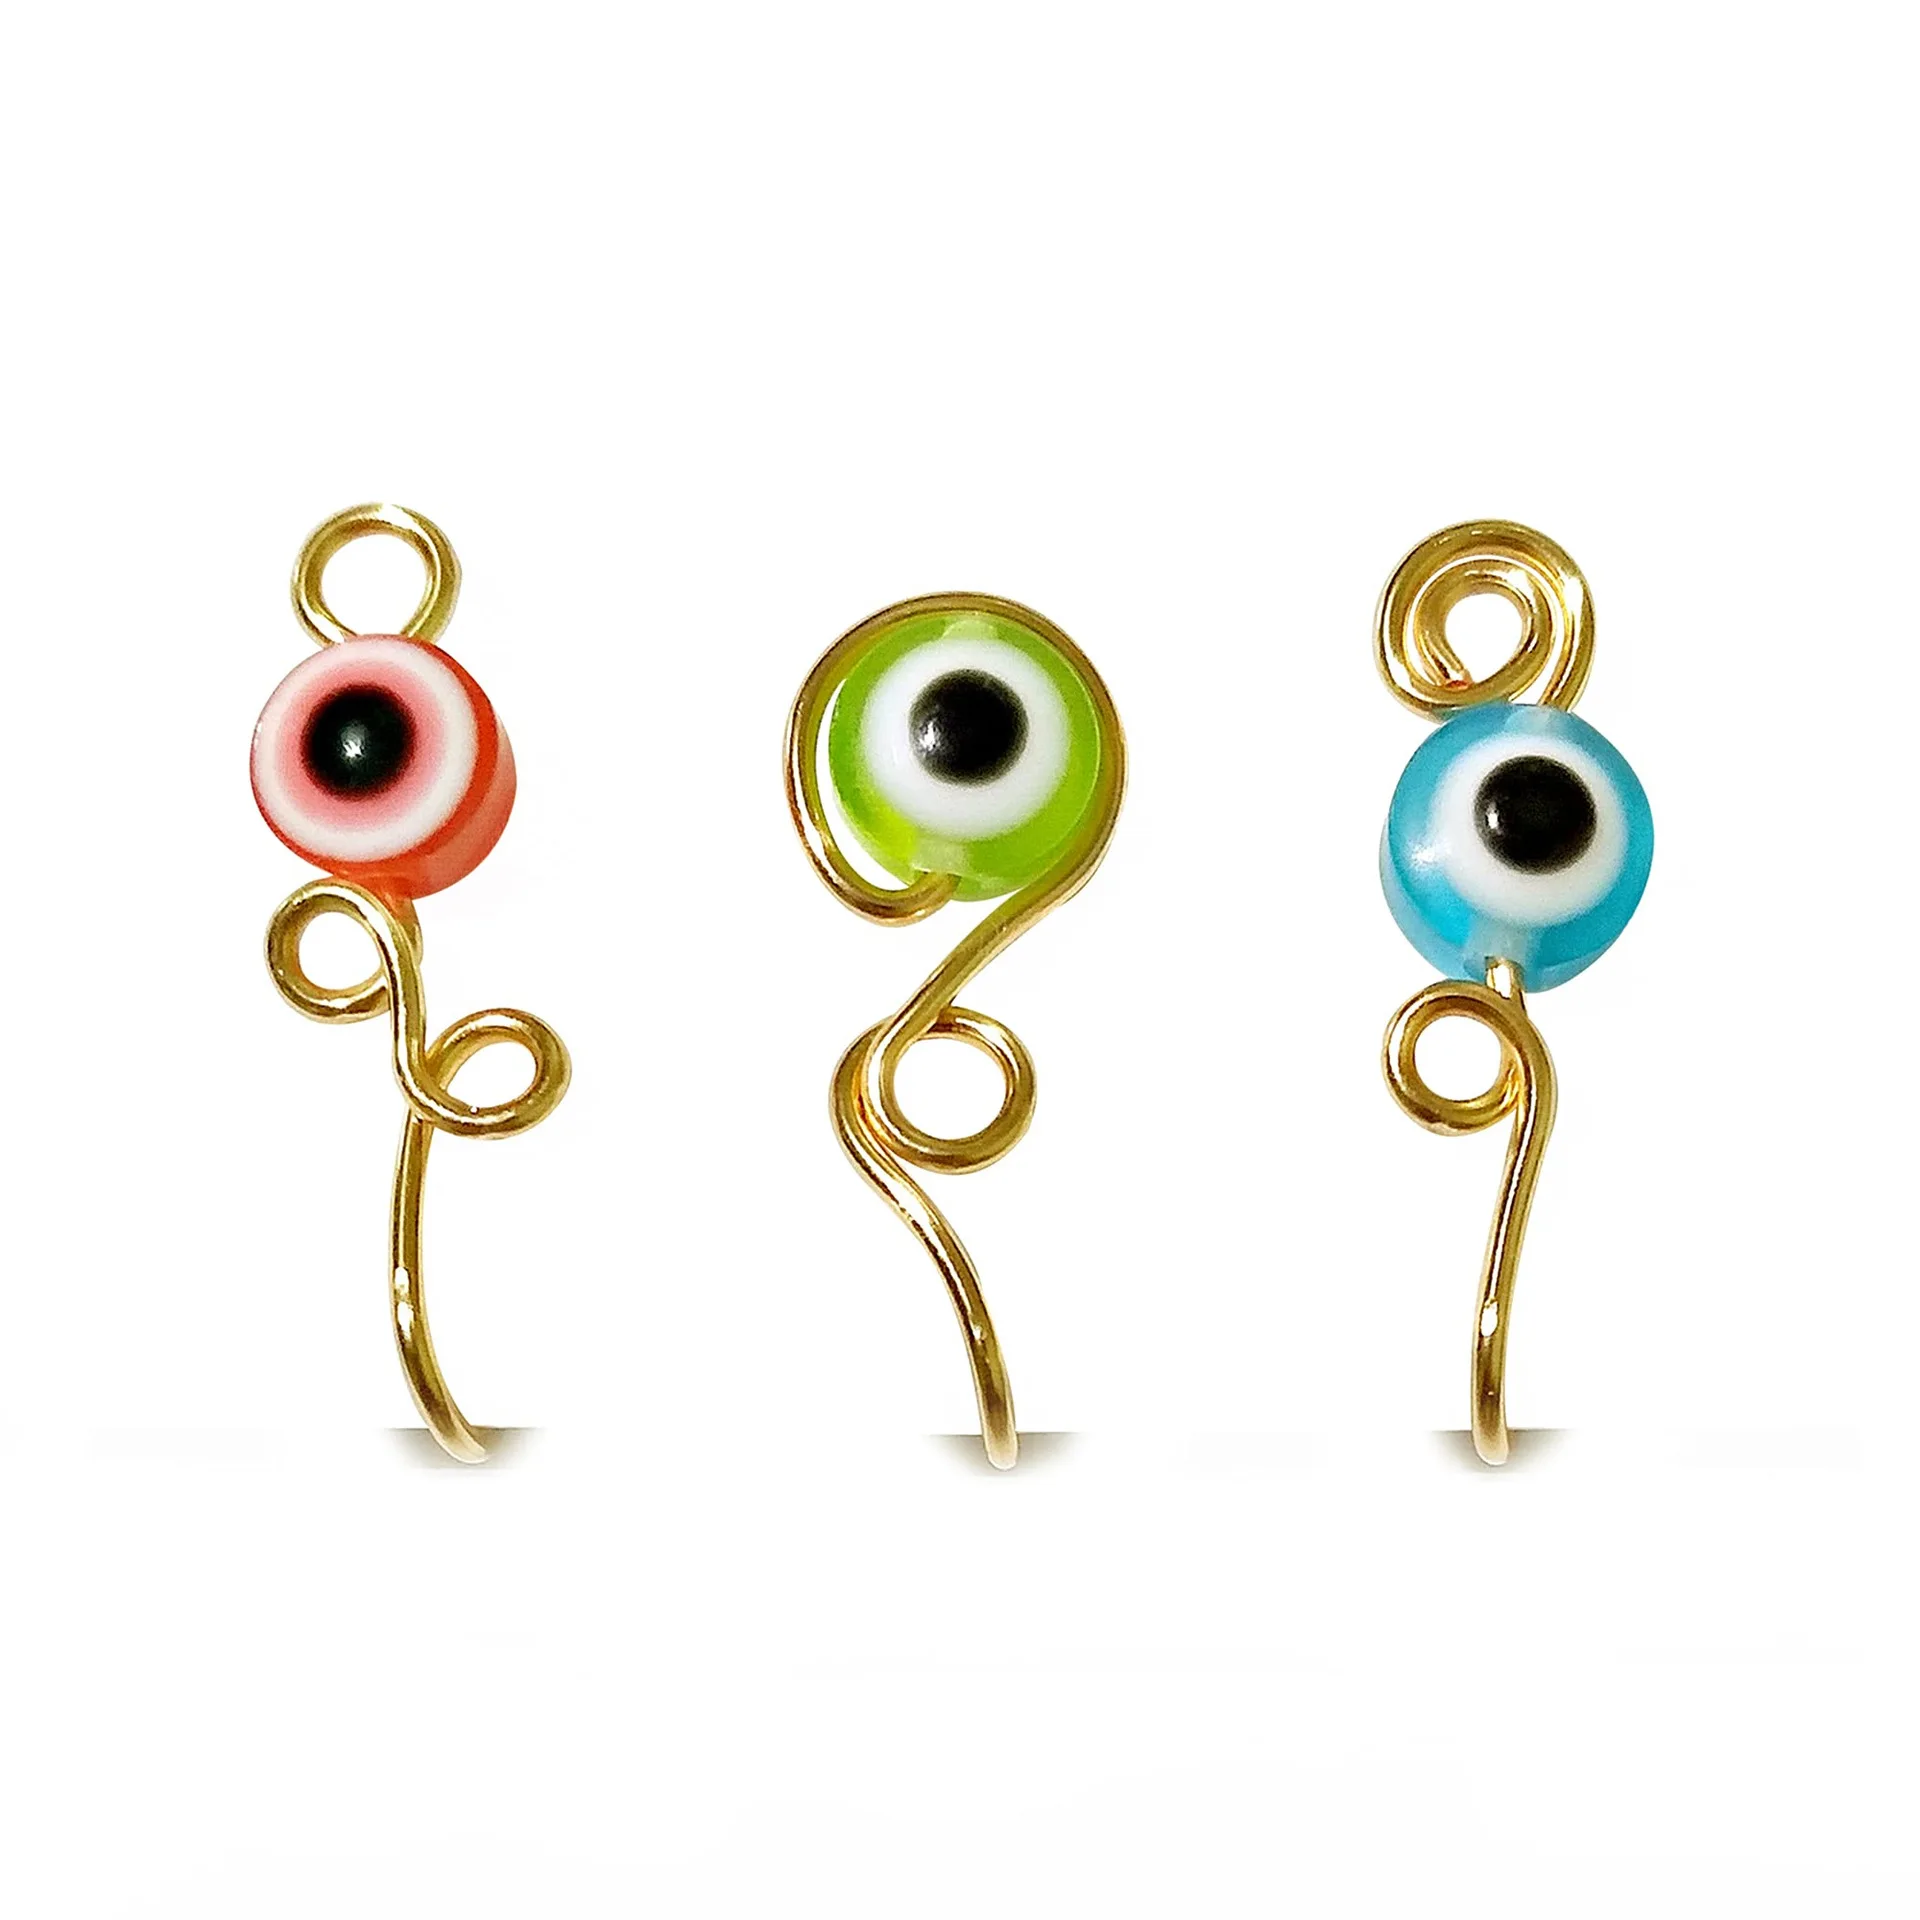 

Gaby new design cute devil eye nose cuffs Hoop nose clip non piercing faux nose rings Jewelry, Red,green,blue